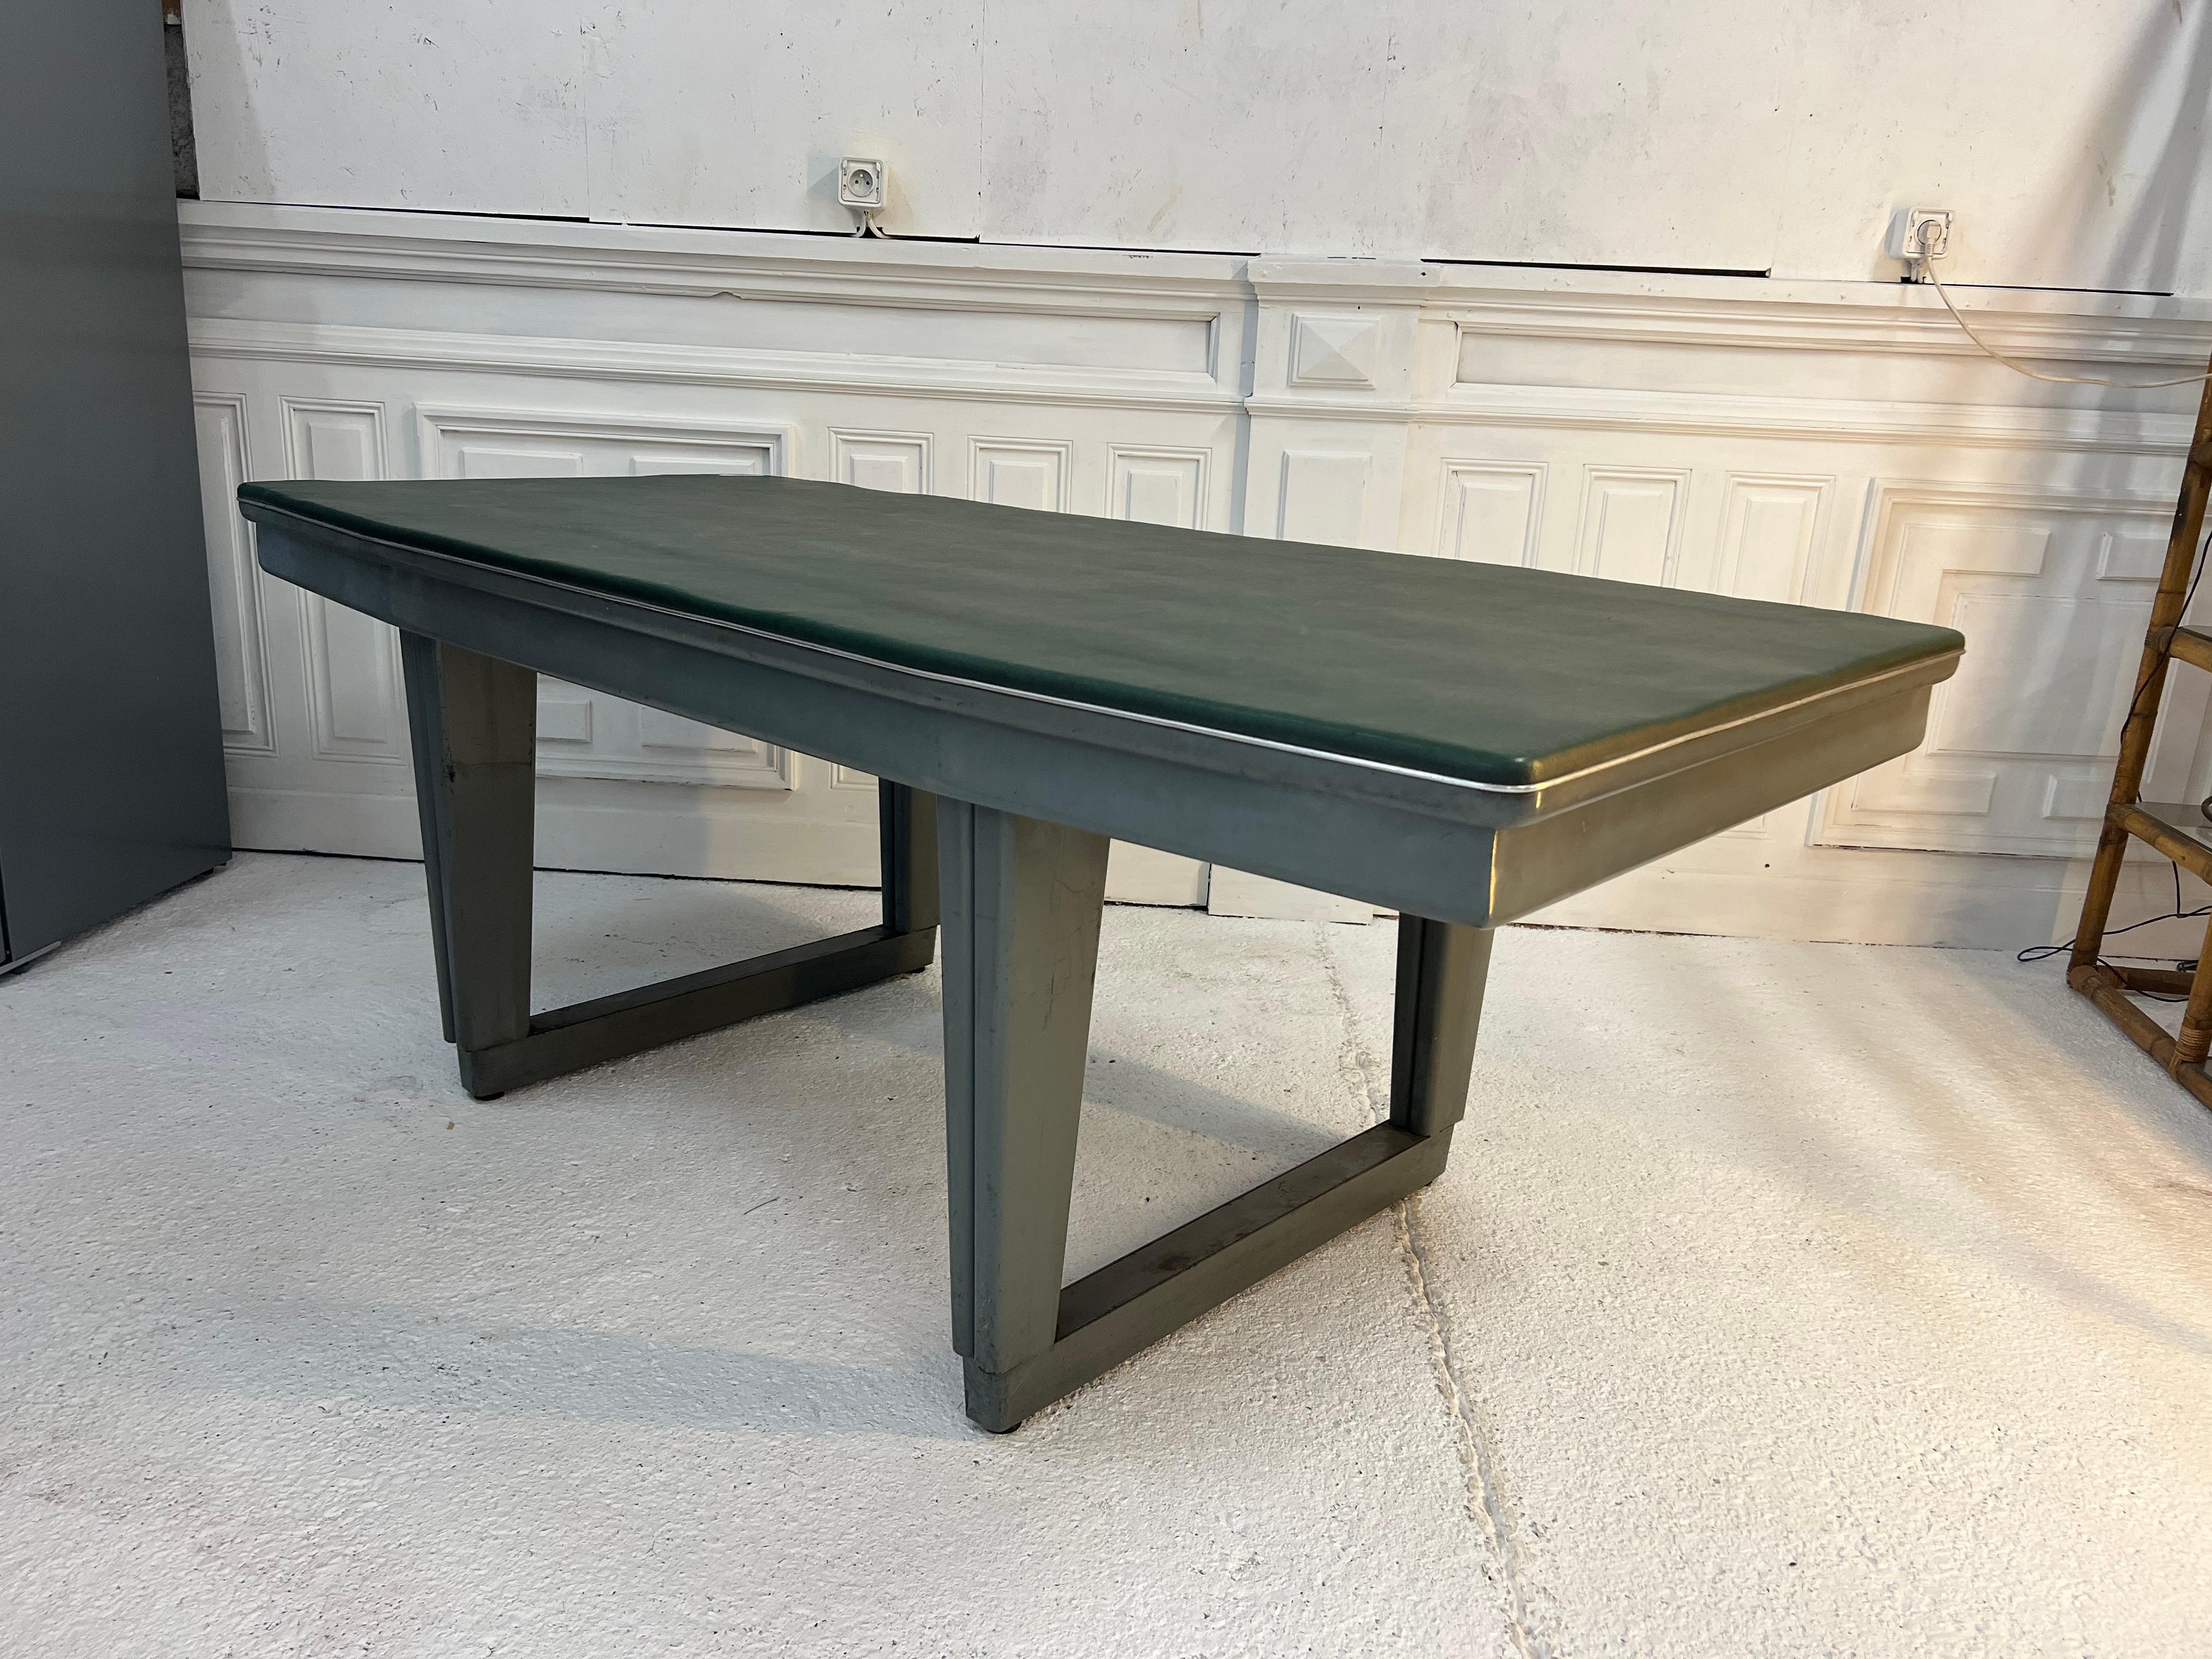 Arge industrial table with its original gray lacquered metal base and its top covered with green moleskin
The tray is octagonal in shape which gives it a softer side and easy to install in your interior.
The origin of the table was a sorting table